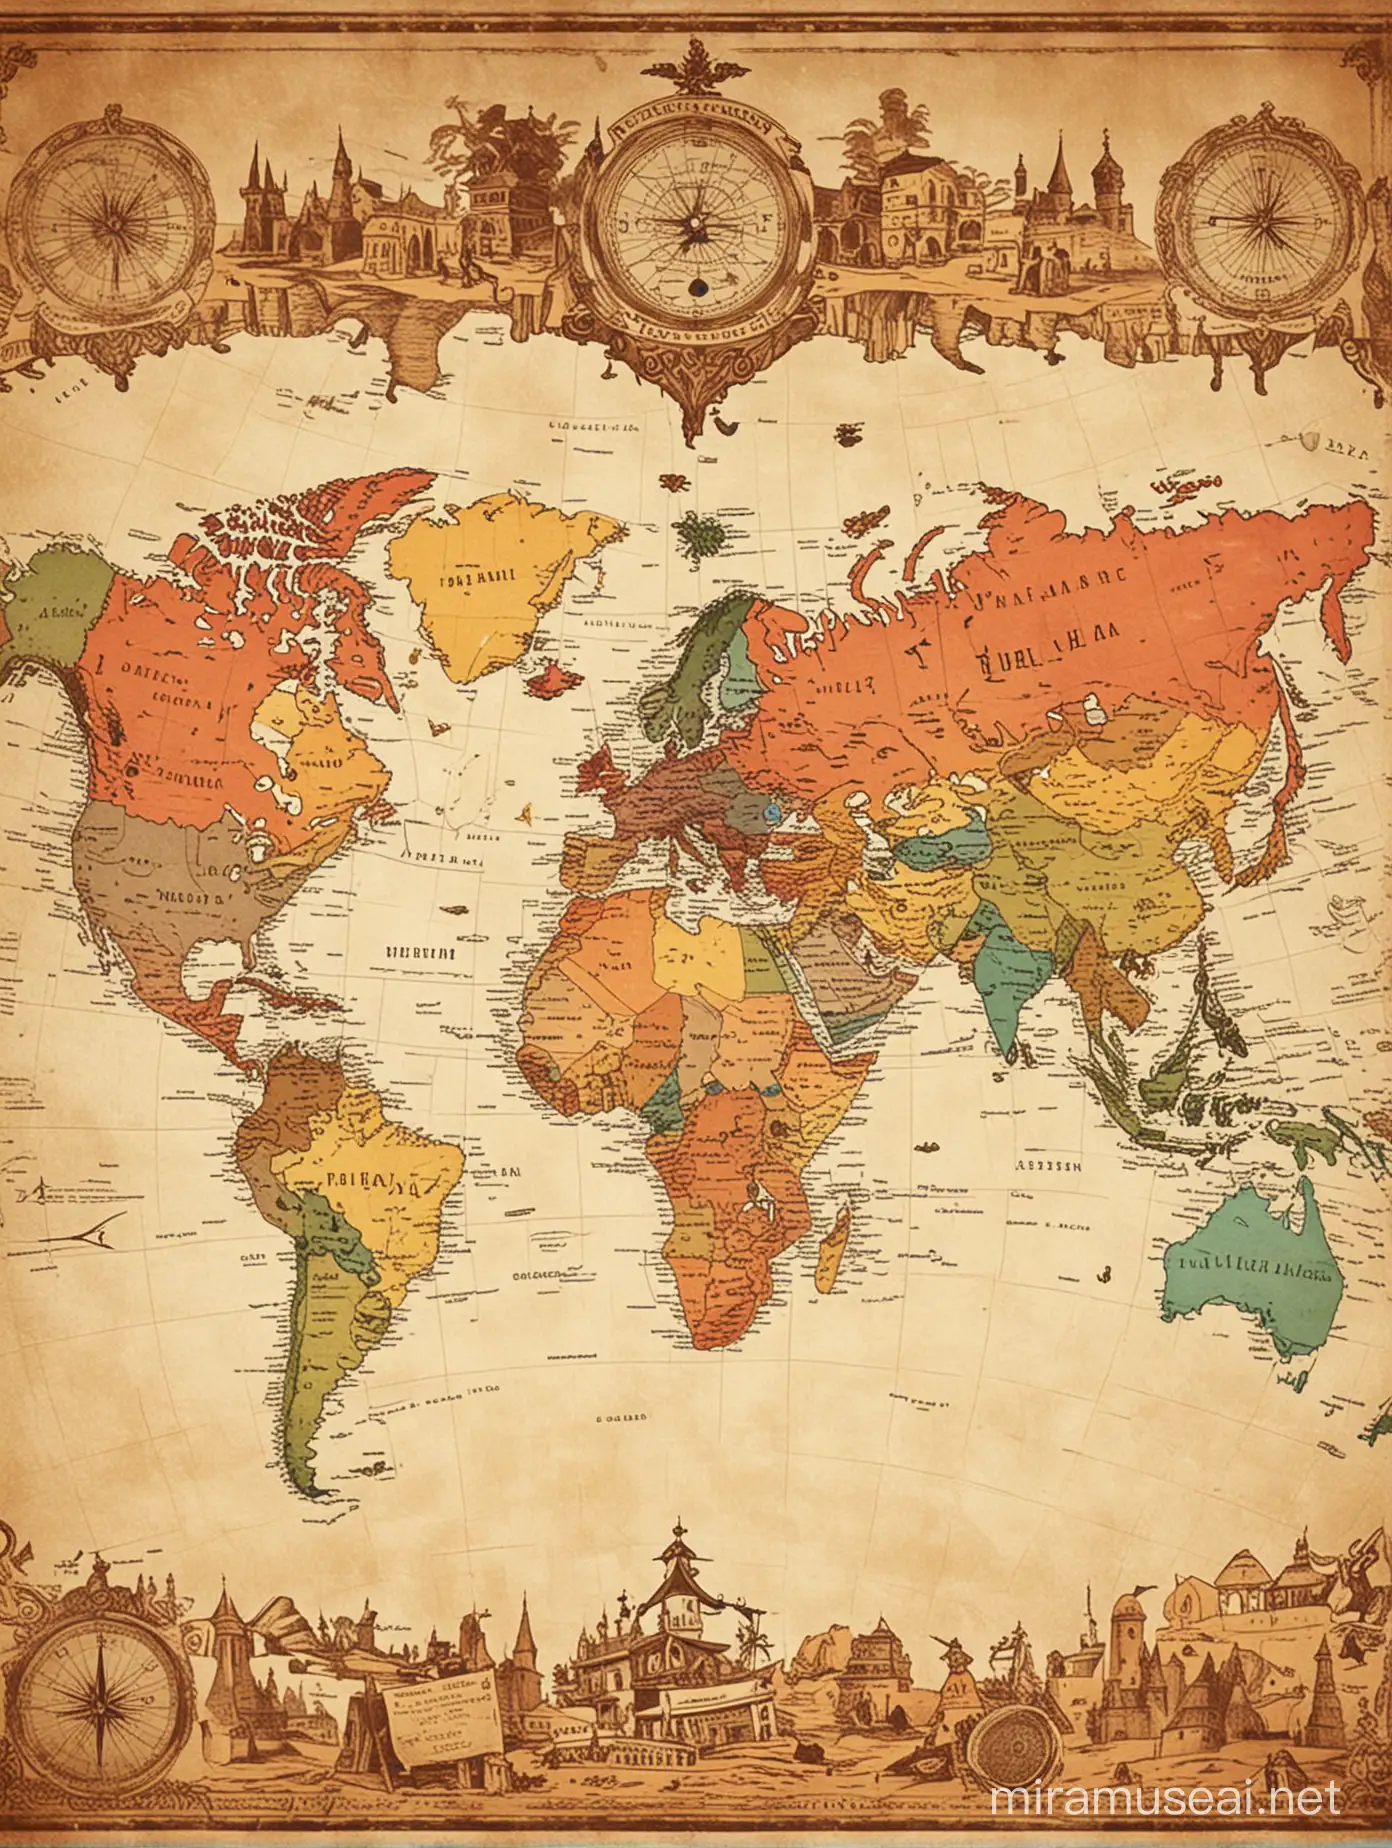 Vintage World Map Illustration with Antique Flair